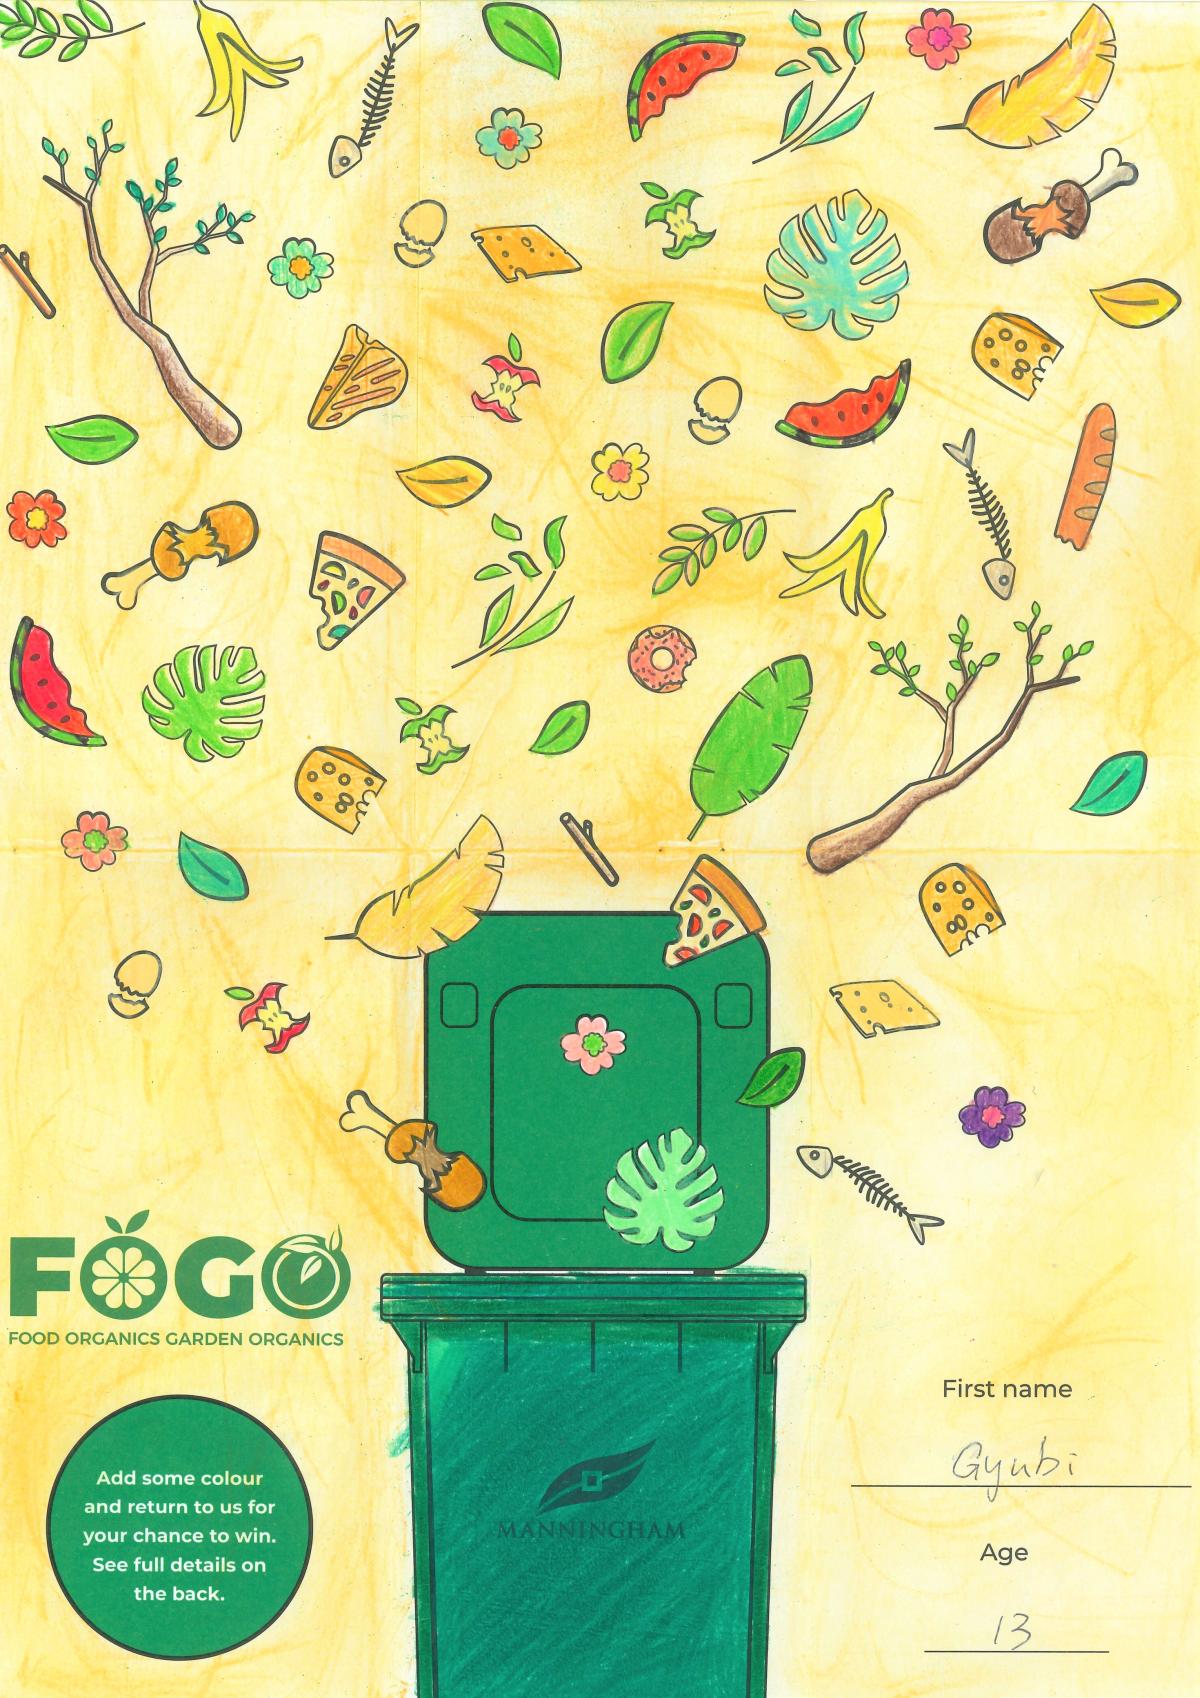 An image of a FOGO bin with all sorts of organic rubbish falling into it from above. The name 'Gyubi' is in the bottom right corner.